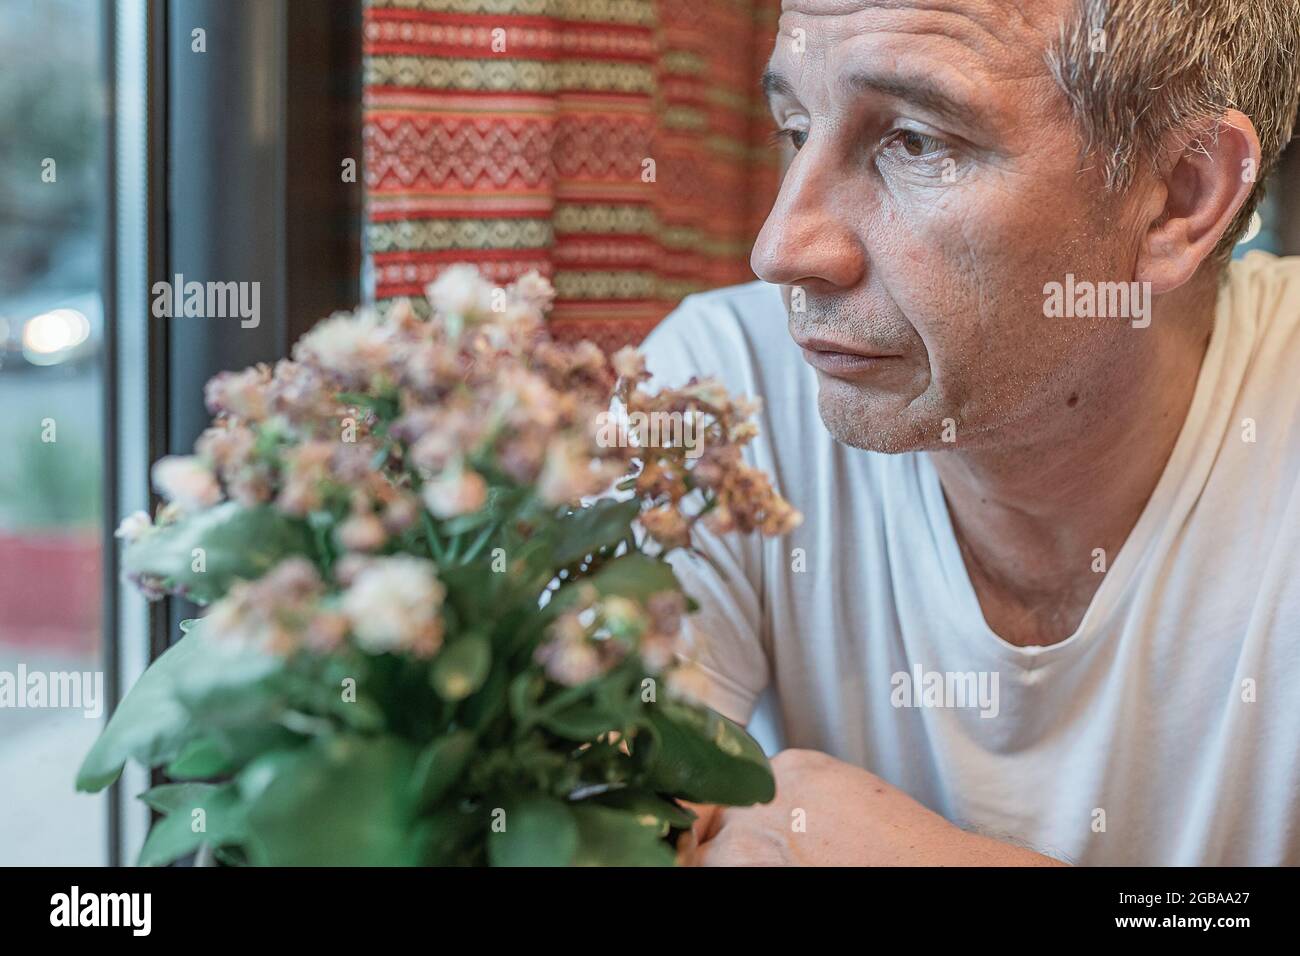 man in depressed state with sad emotions on his face while waiting in restaurant with a withered flower in flowerpot Stock Photo